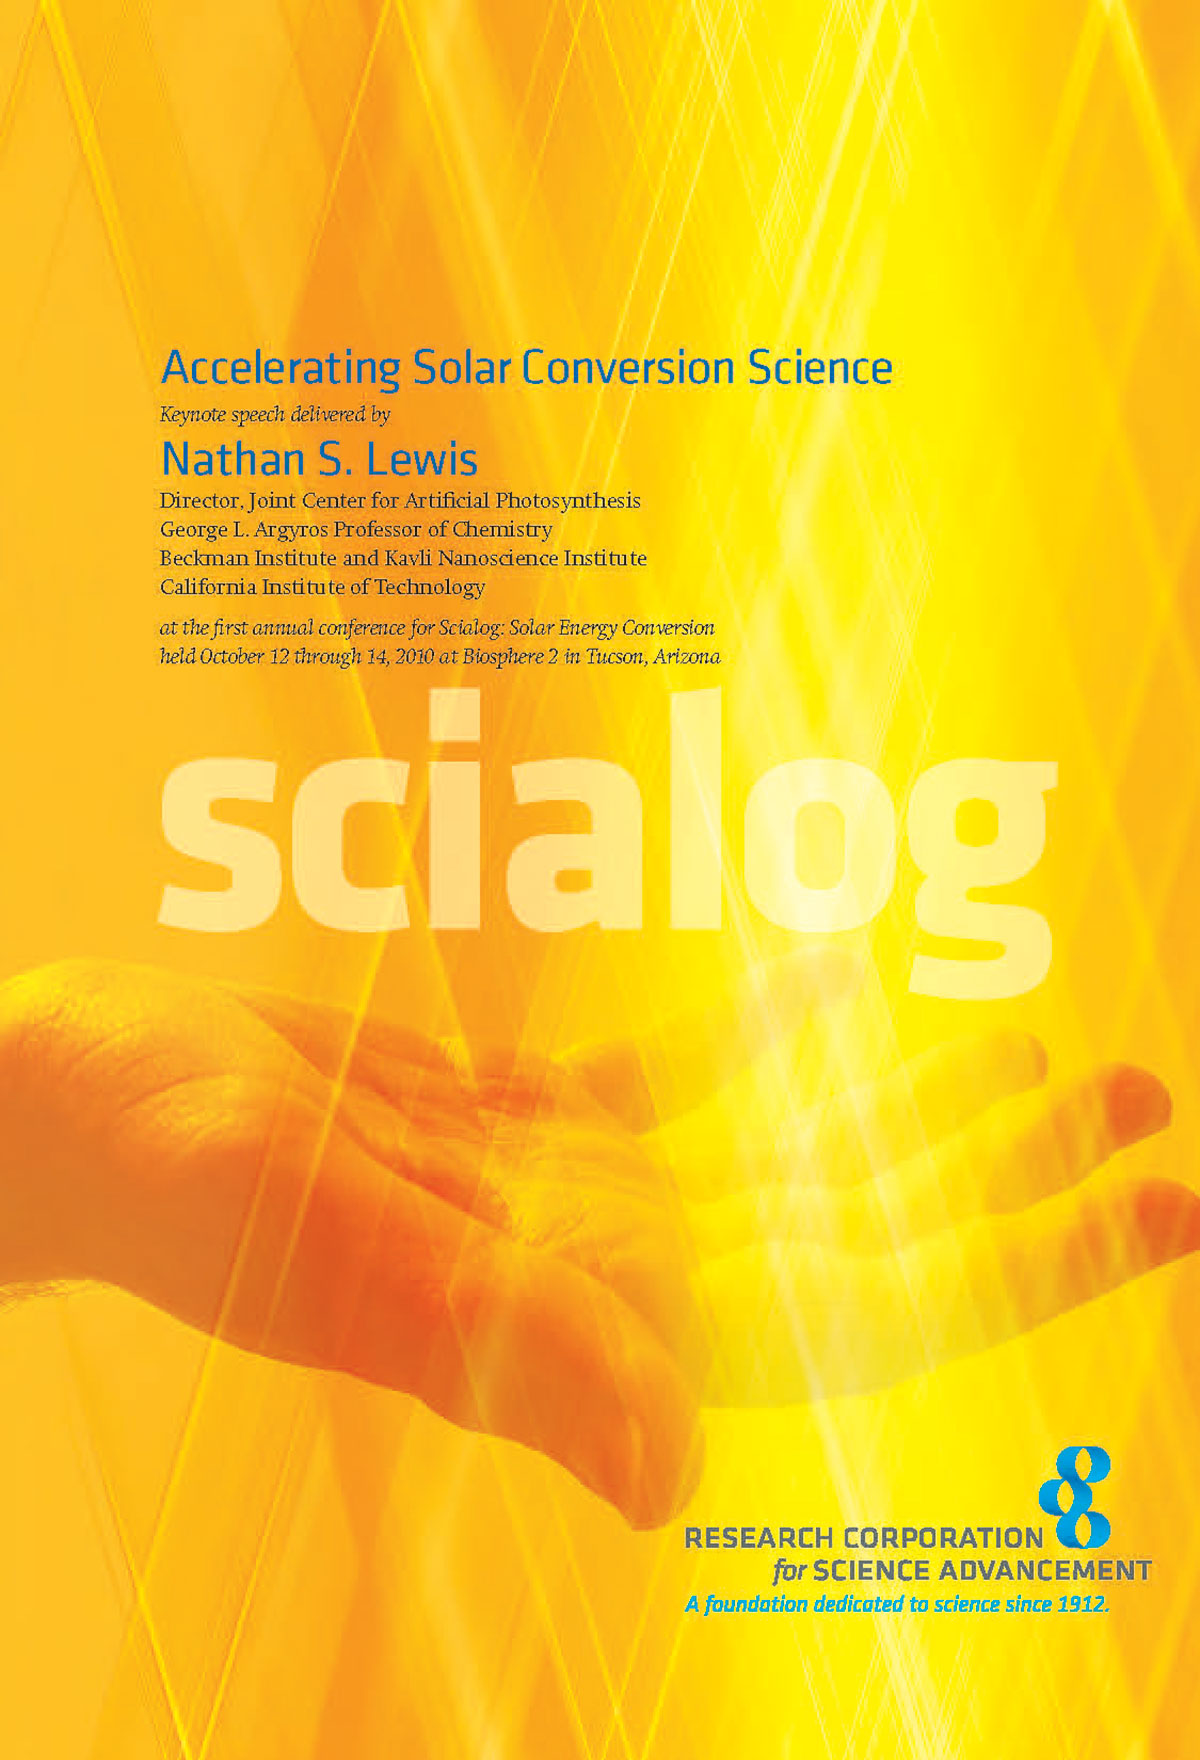 Accelerating Solar Conversion Science